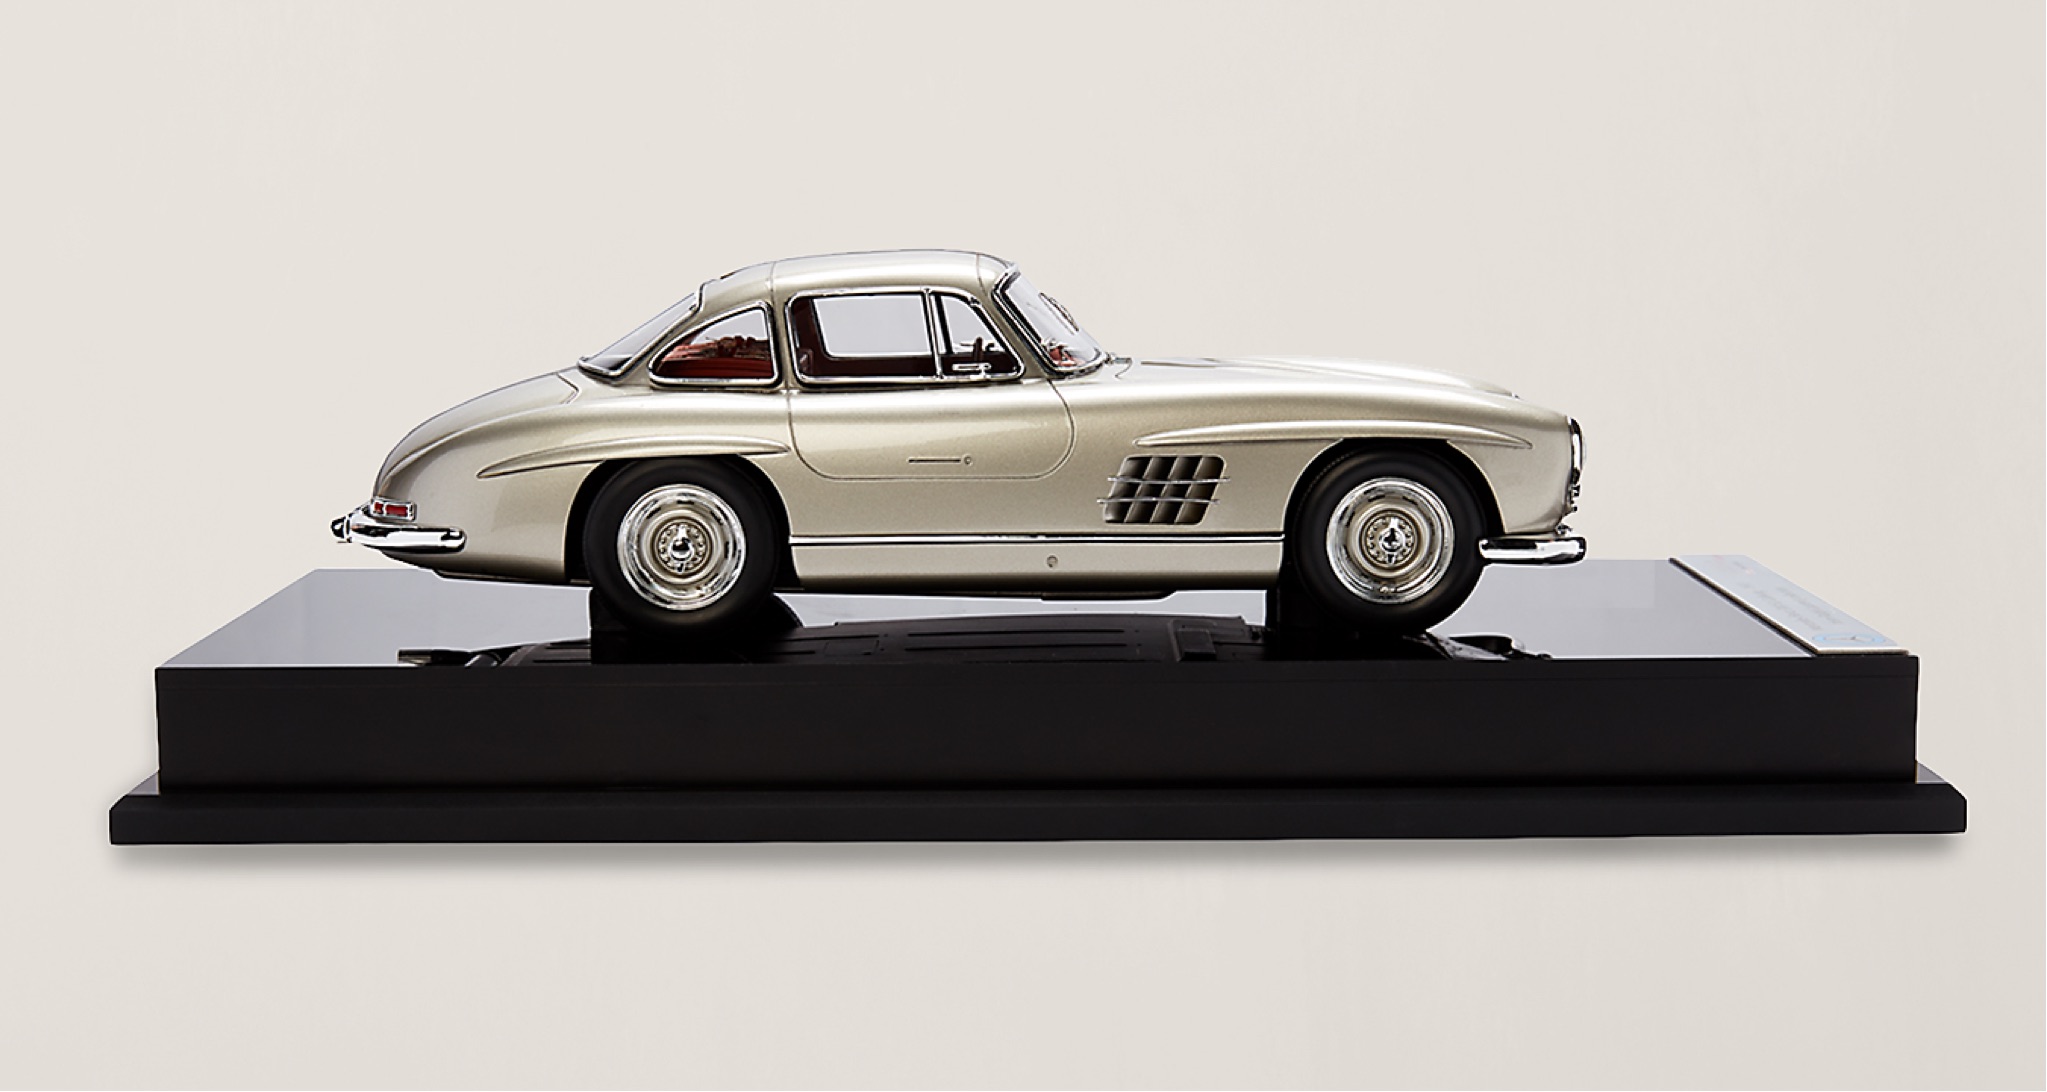 <span>The 1955 Mercedes Benz 300 SL Coupe “Gullwing” was the fastest production car of its time, the first to use fuel injection directly into the cylinders for a top speed of 161 miles per hour</span><br/><a href="https://www.ralphlauren.com/home-decor-decorative-accessories/mercedes-benz-gullwing-coupe/453620.html?dwvar453620_colorname=Silver" target="_blank" class="rlc-linecta rlc-lineplay"><span>SHOP NOW</span></a>